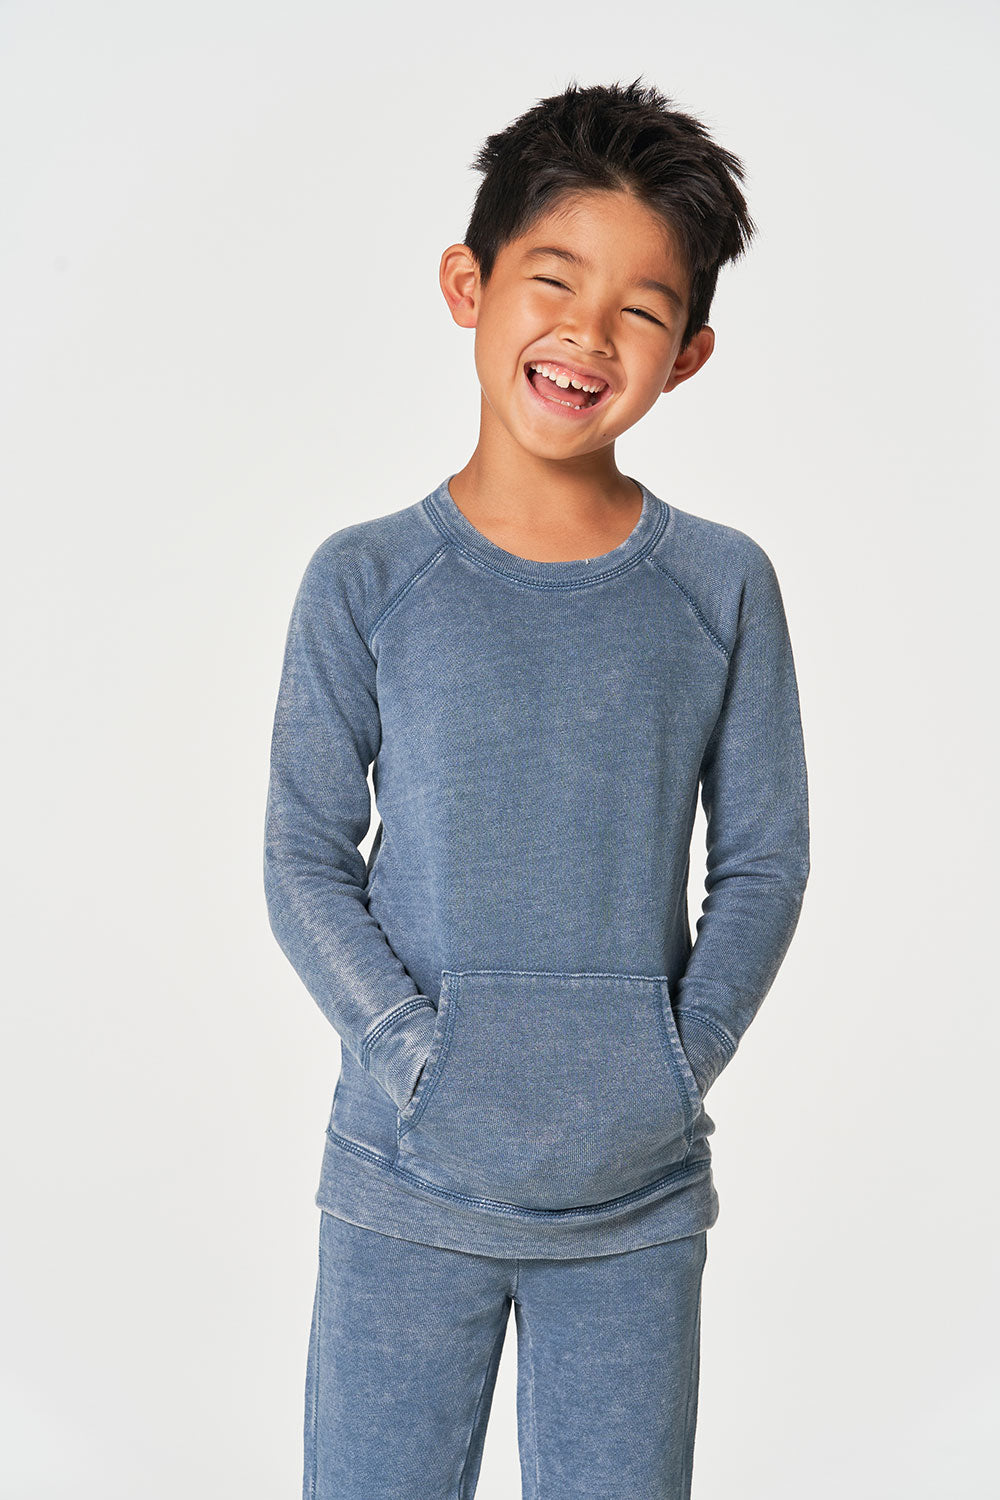 Boys Linen French Terry Long Sleeve Kanga Pocket Pullover BOYS chaserbrand